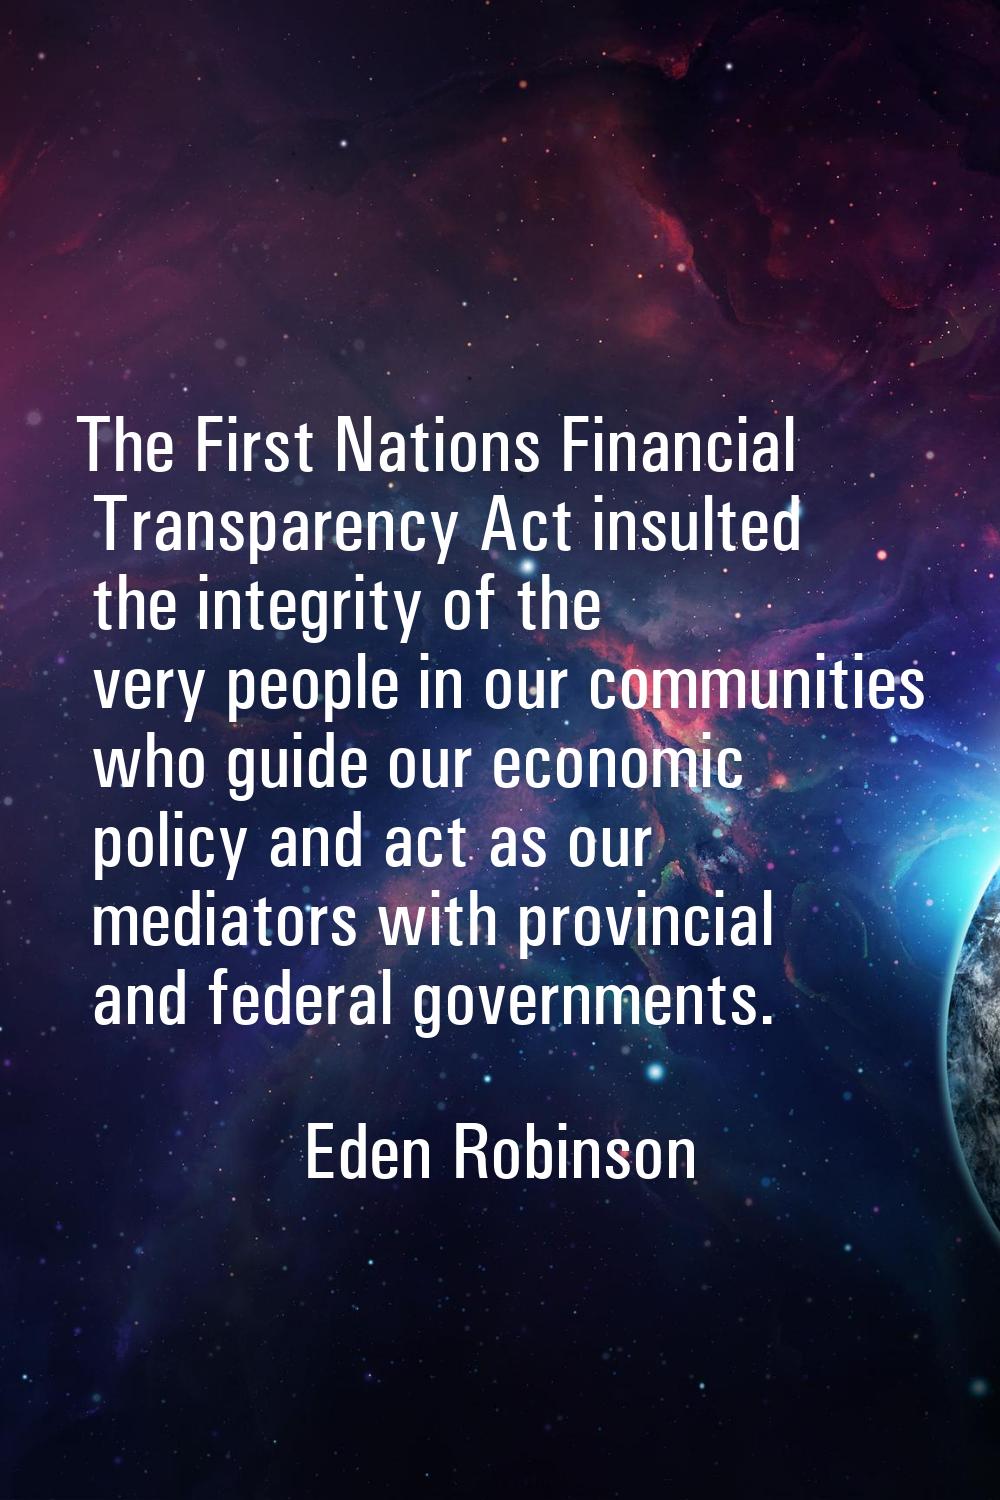 The First Nations Financial Transparency Act insulted the integrity of the very people in our commu